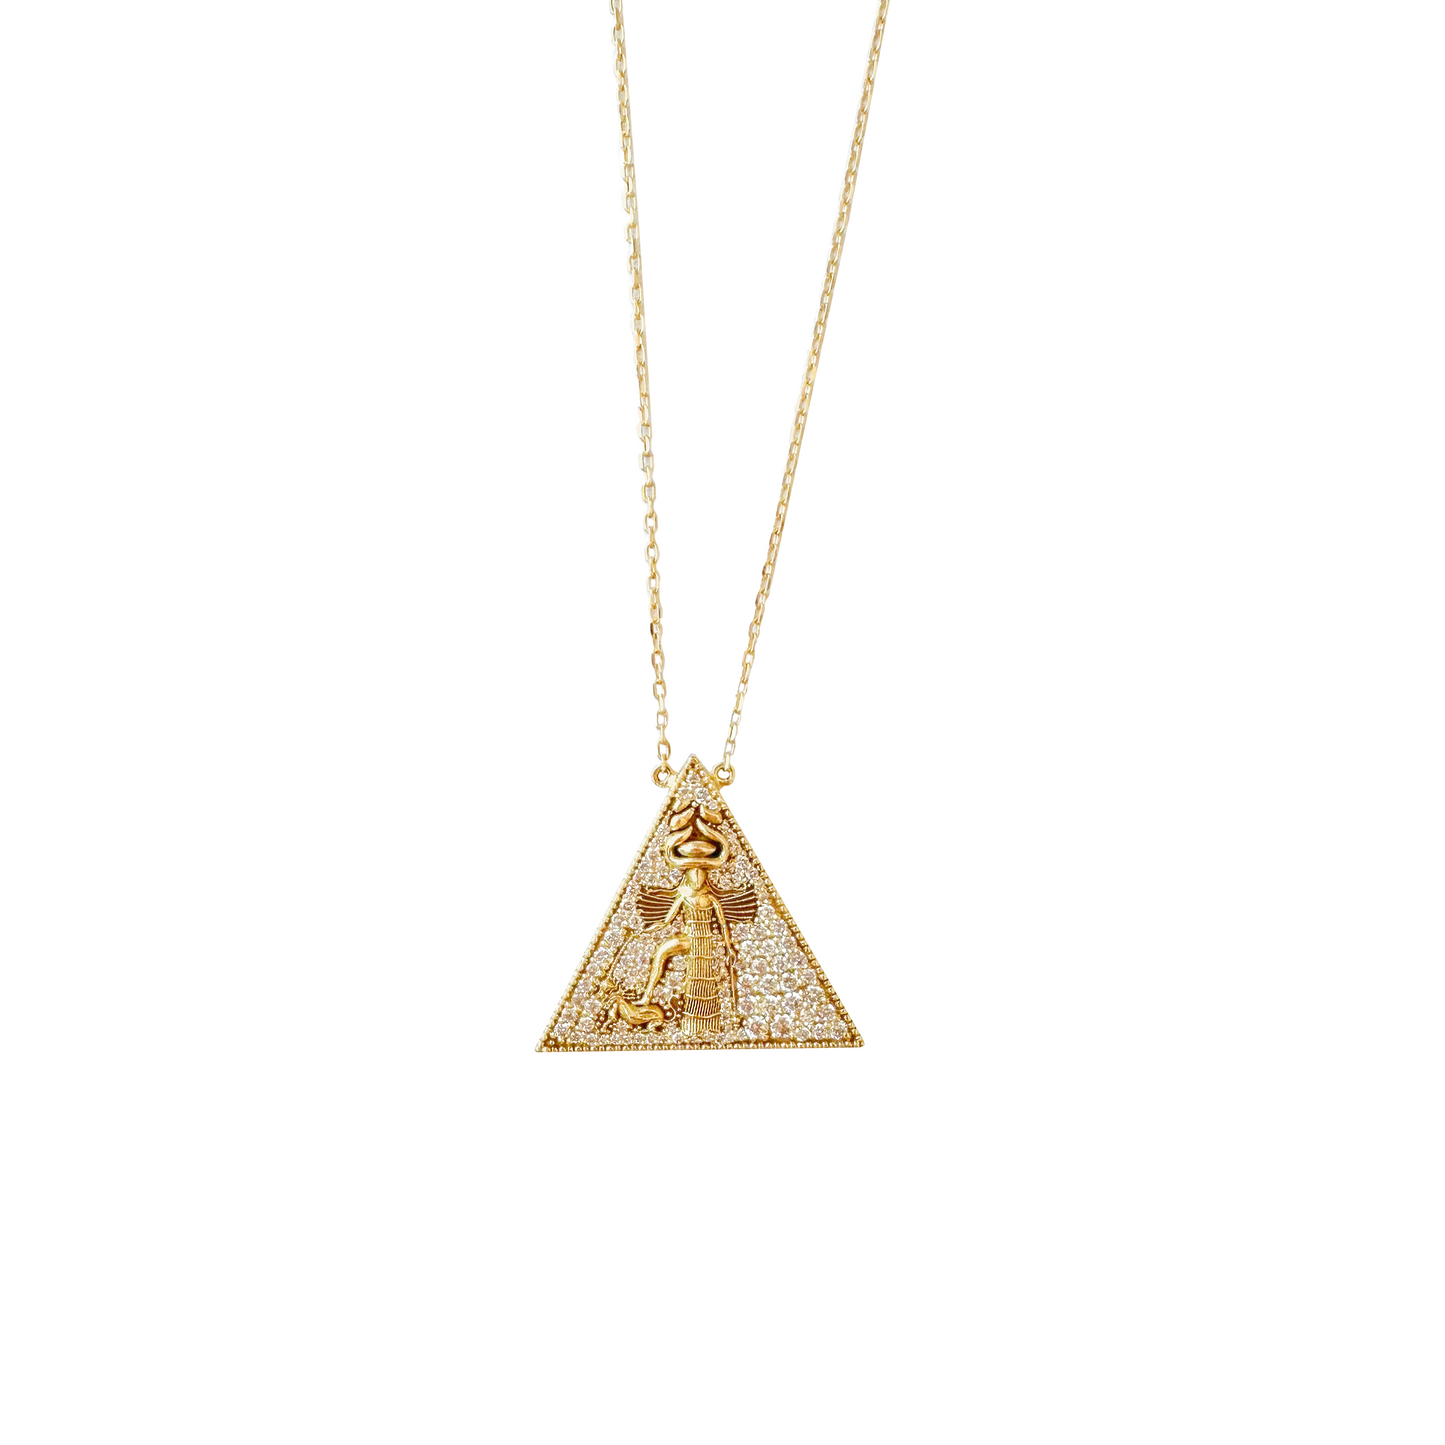 Diamond Ishtar Necklace in Yellow Gold